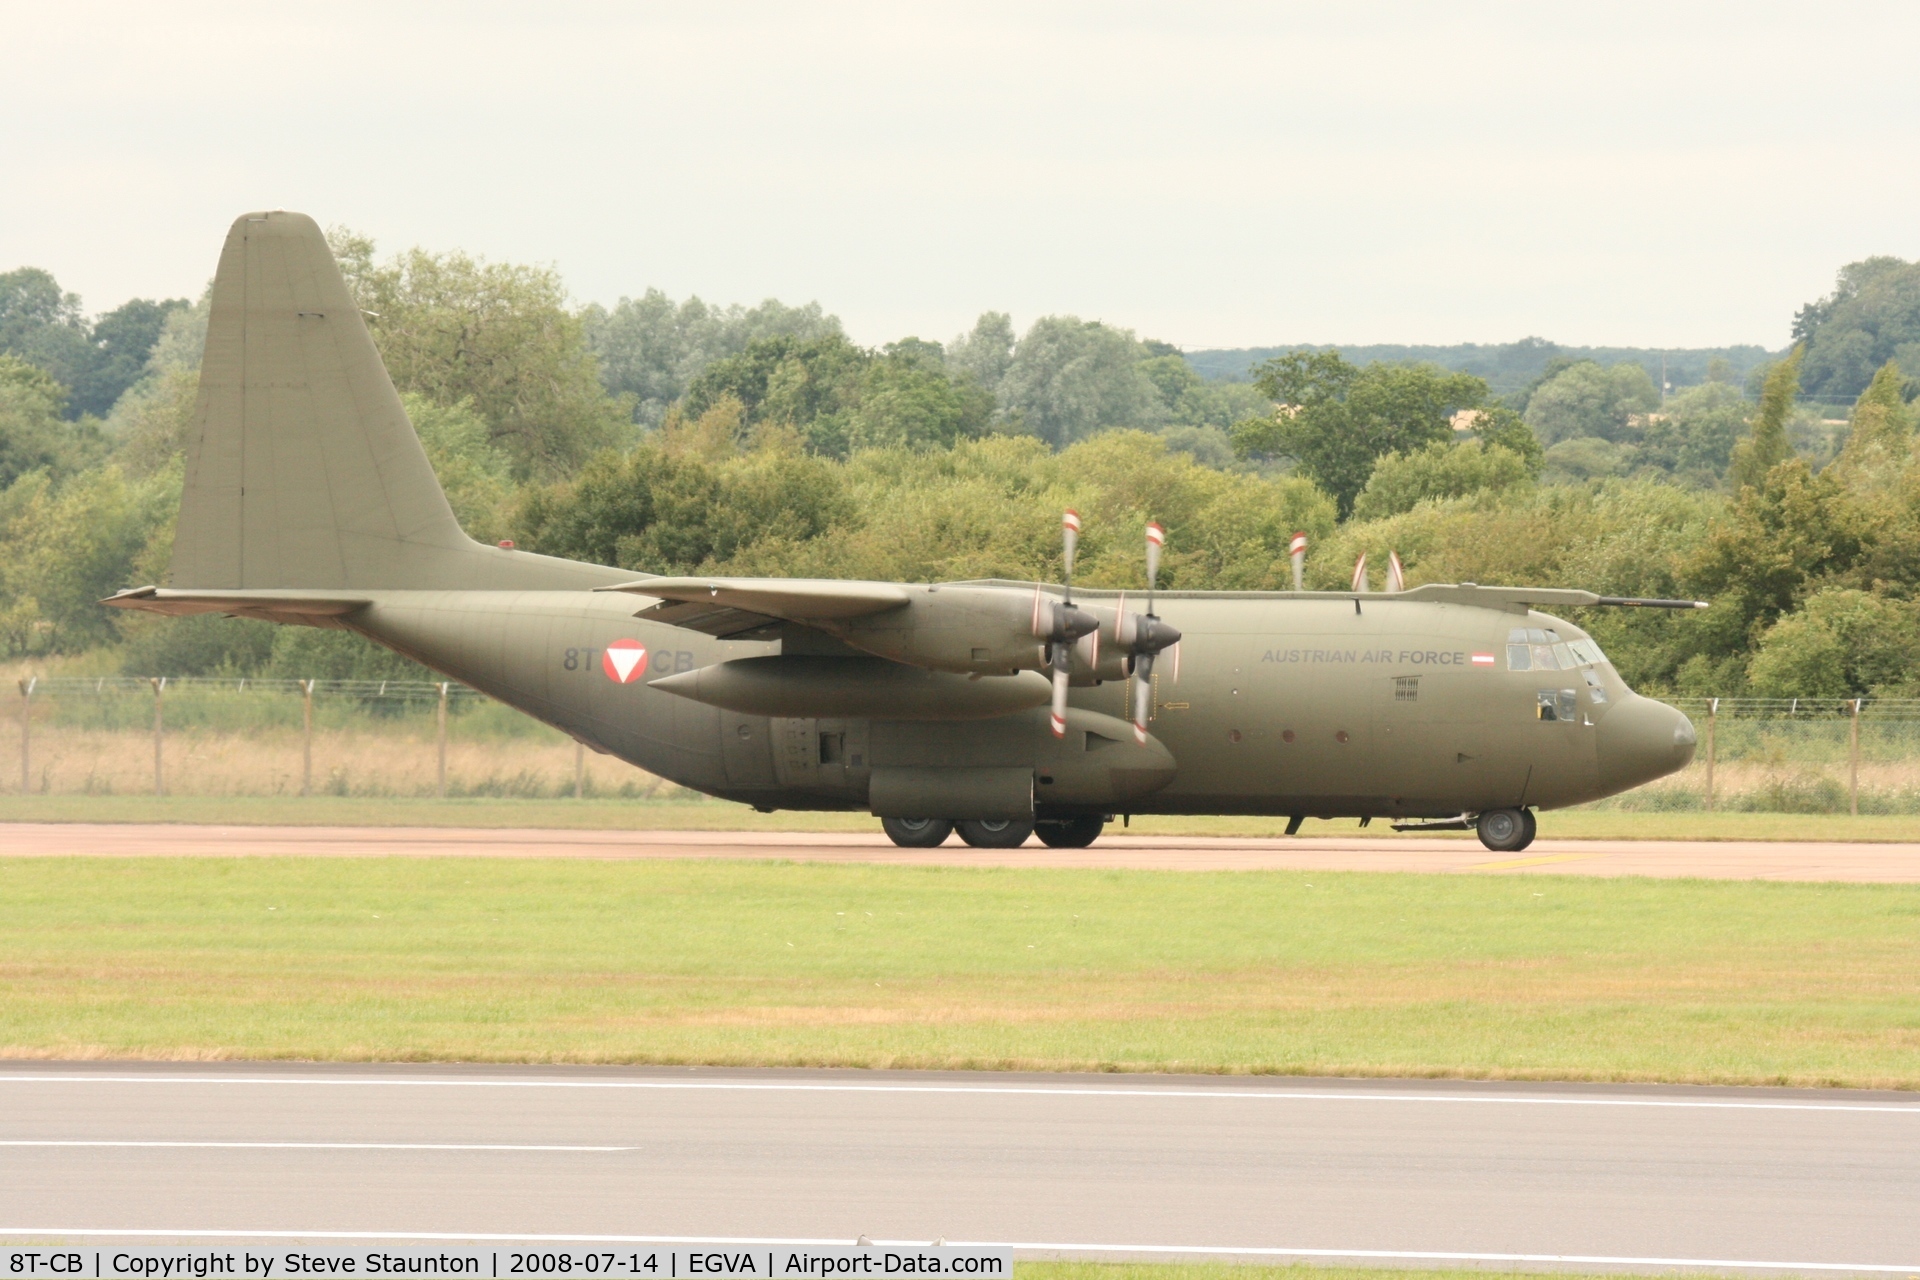 8T-CB, 1967 Lockheed C-130K Hercules C.1 C/N 382-4256, Taken at the Royal International Air Tattoo 2008 during arrivals and departures (show days cancelled due to bad weather)